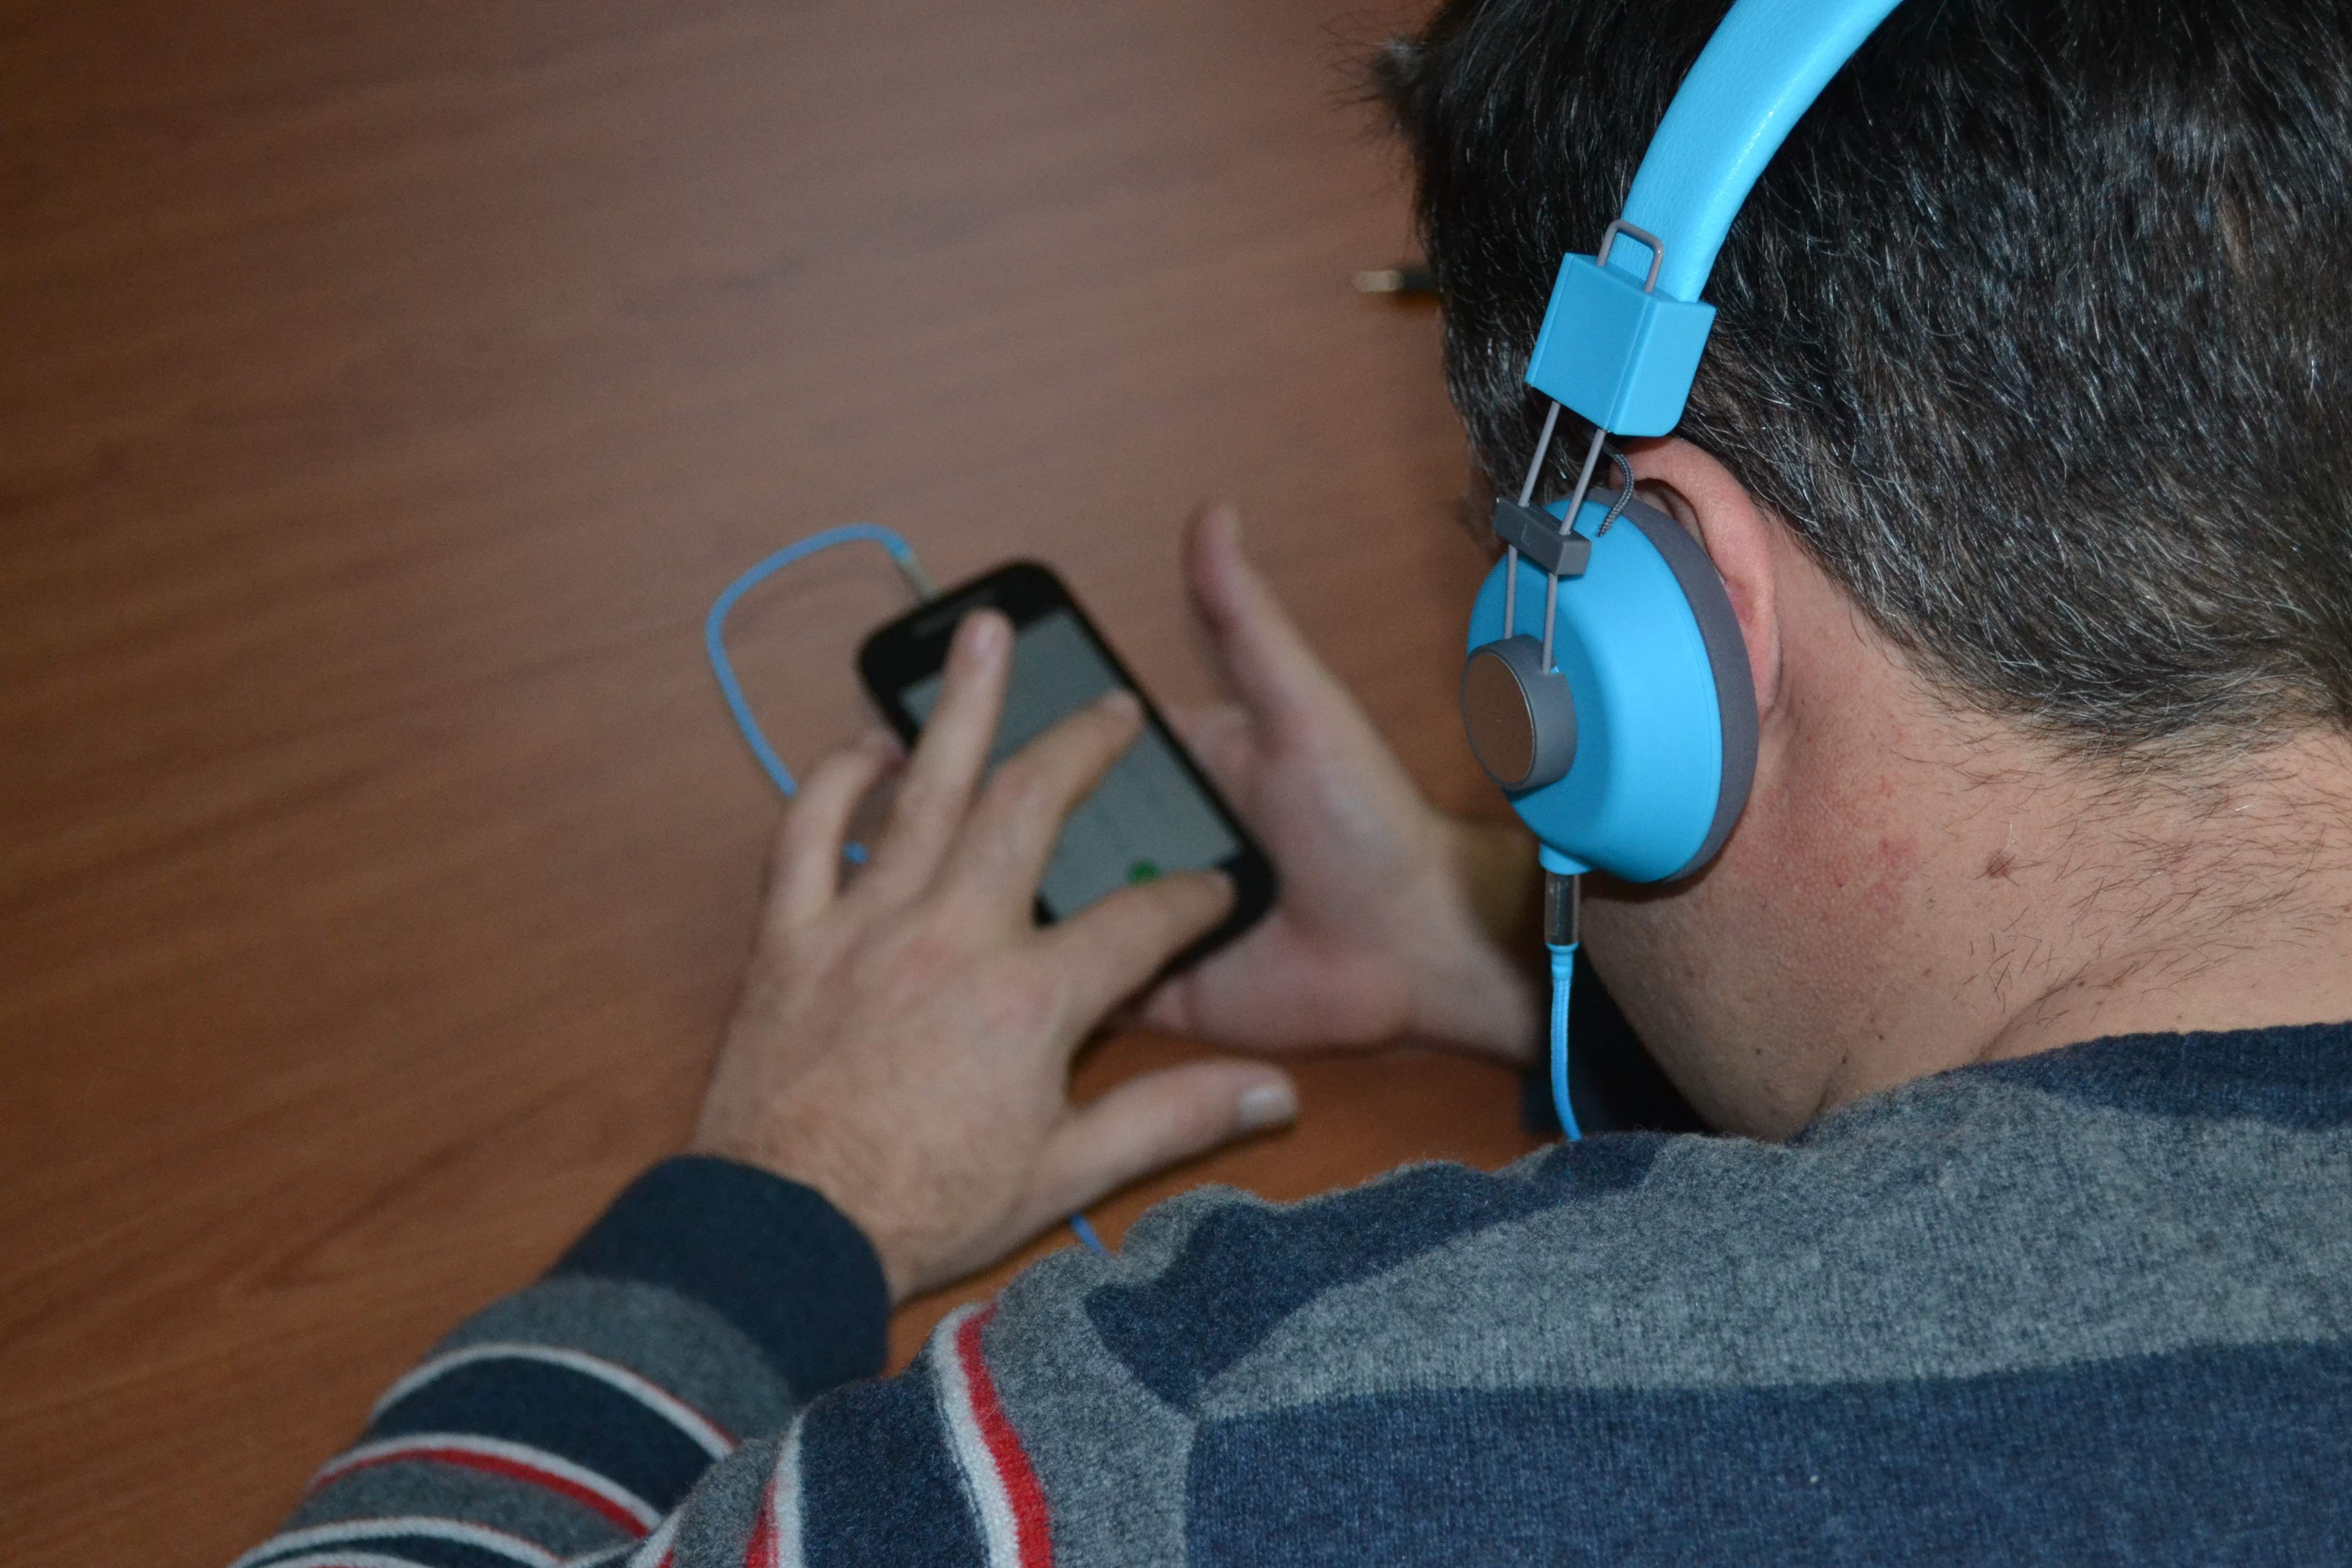 A blind person interacting with a smartphone using headphones.